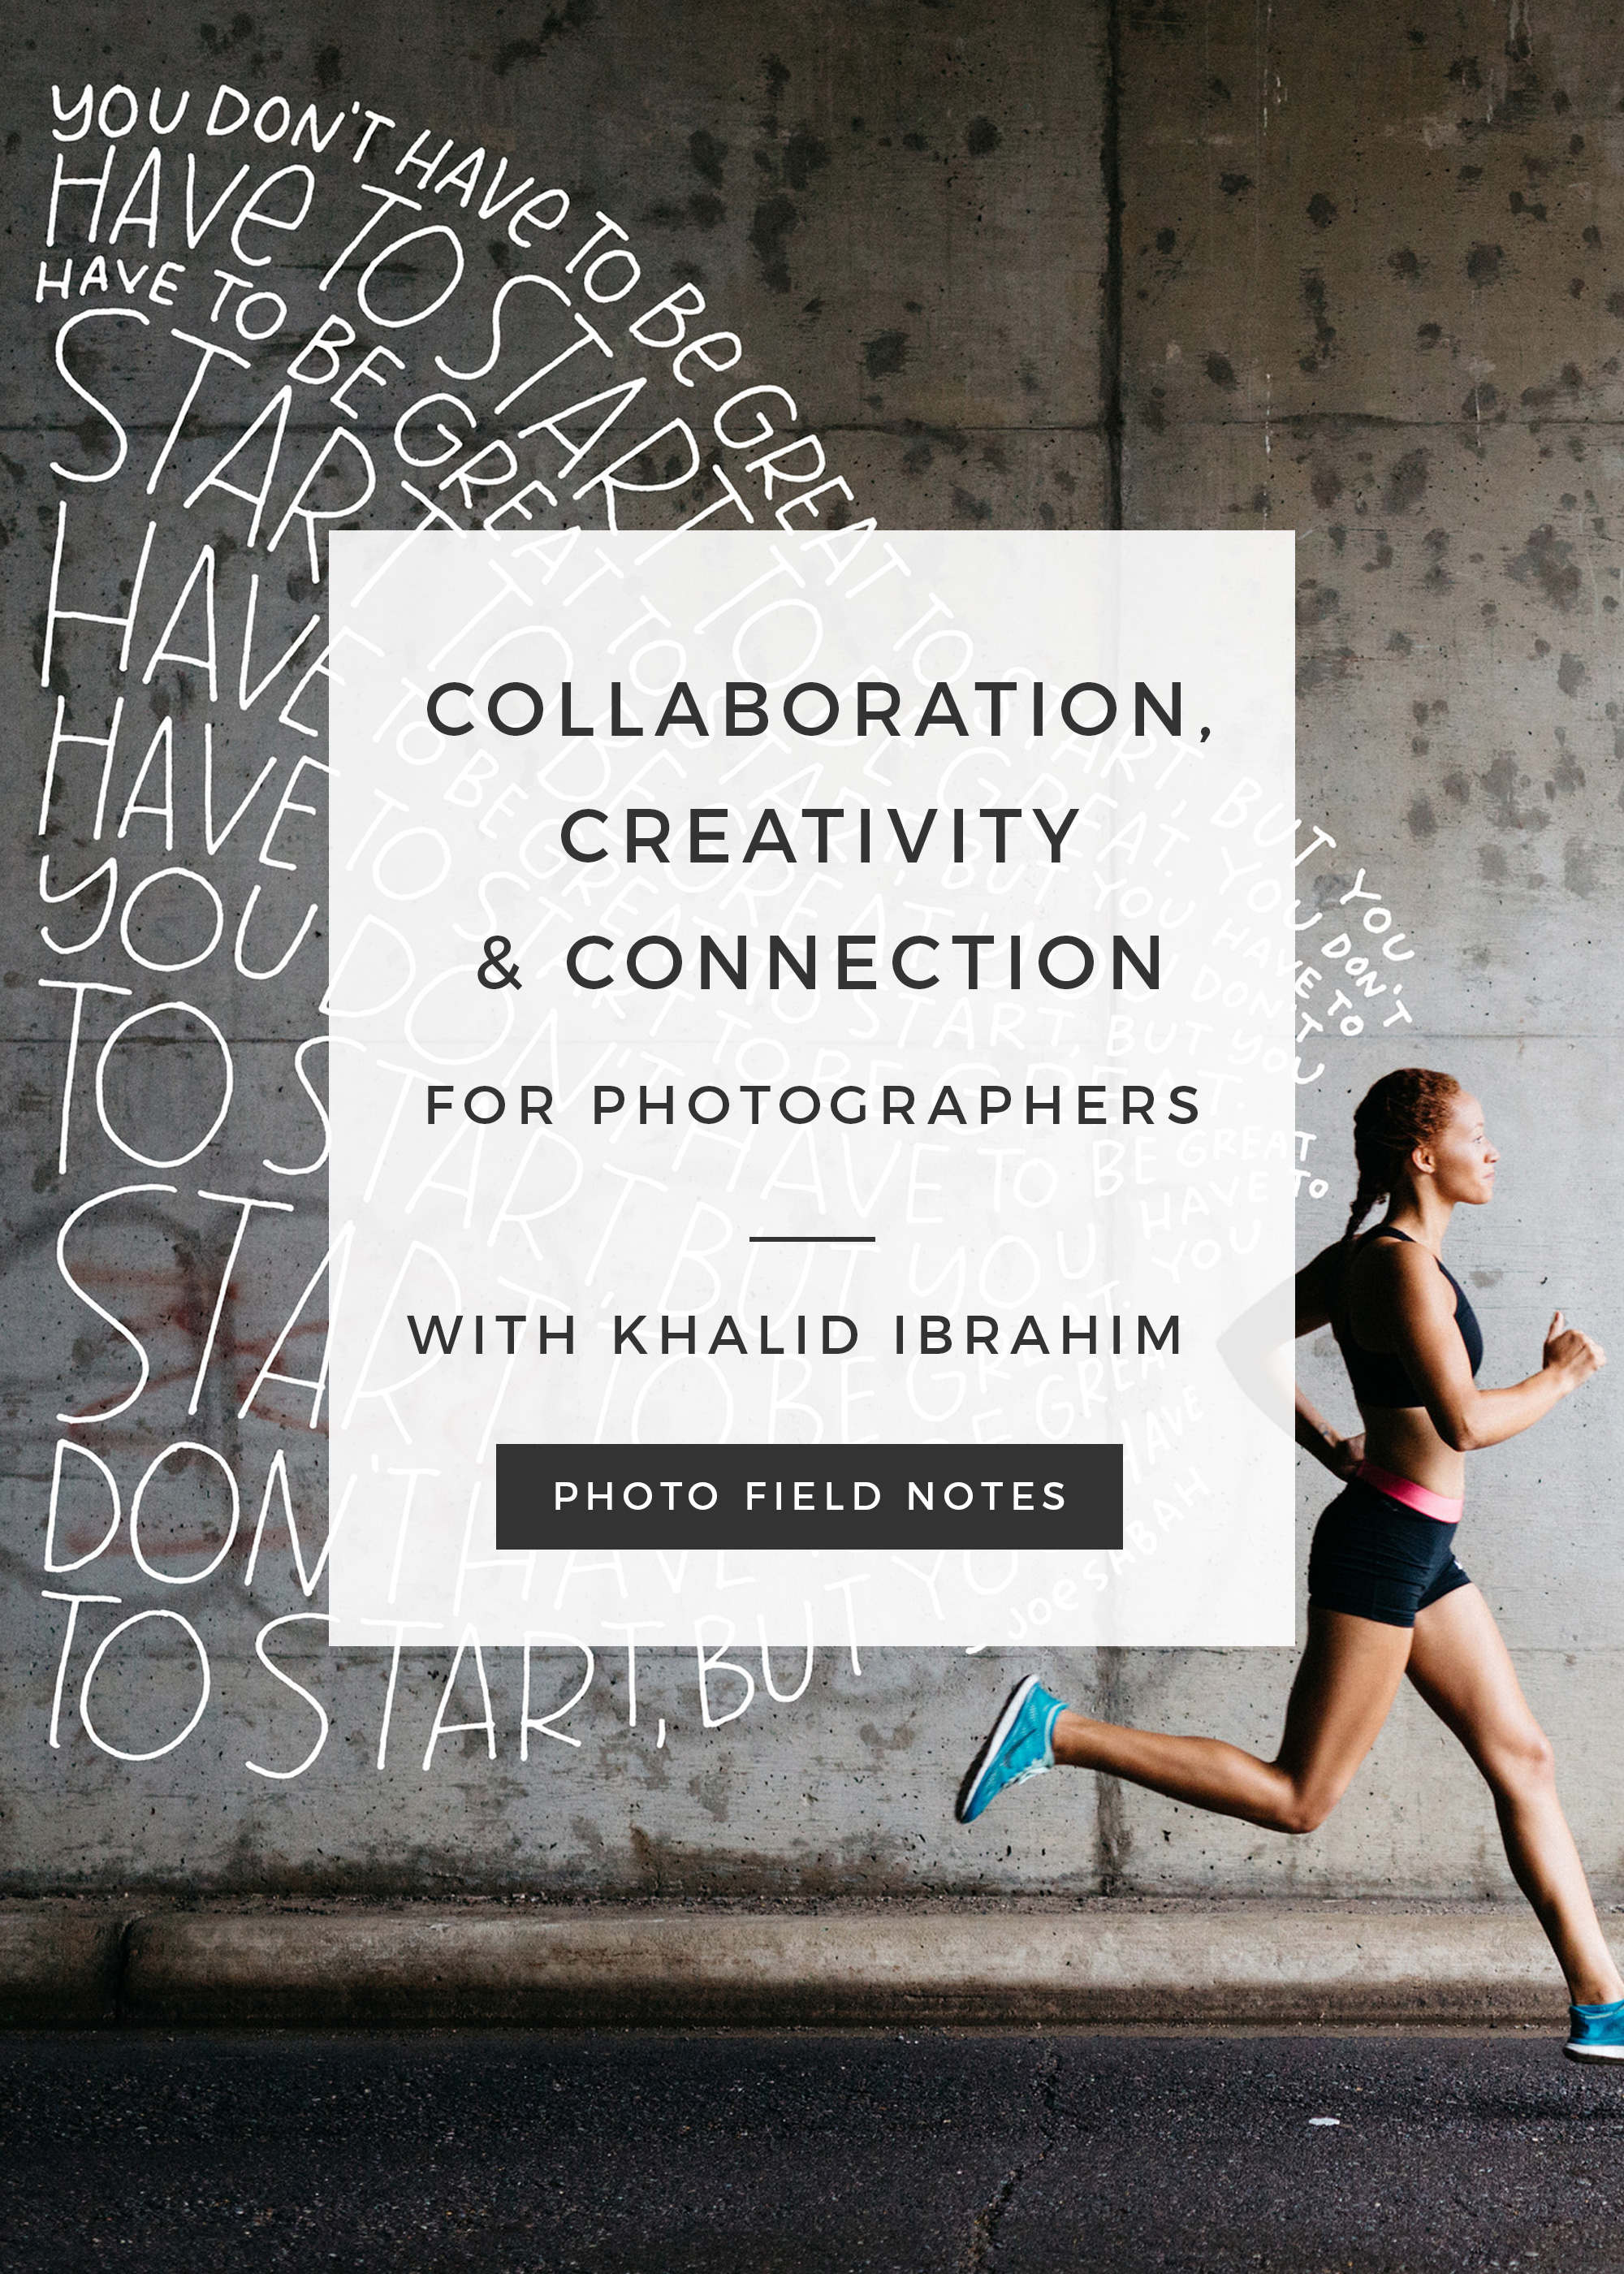 Collaboration, Creativity and Connection for Photographers with Khalid Ibrahim